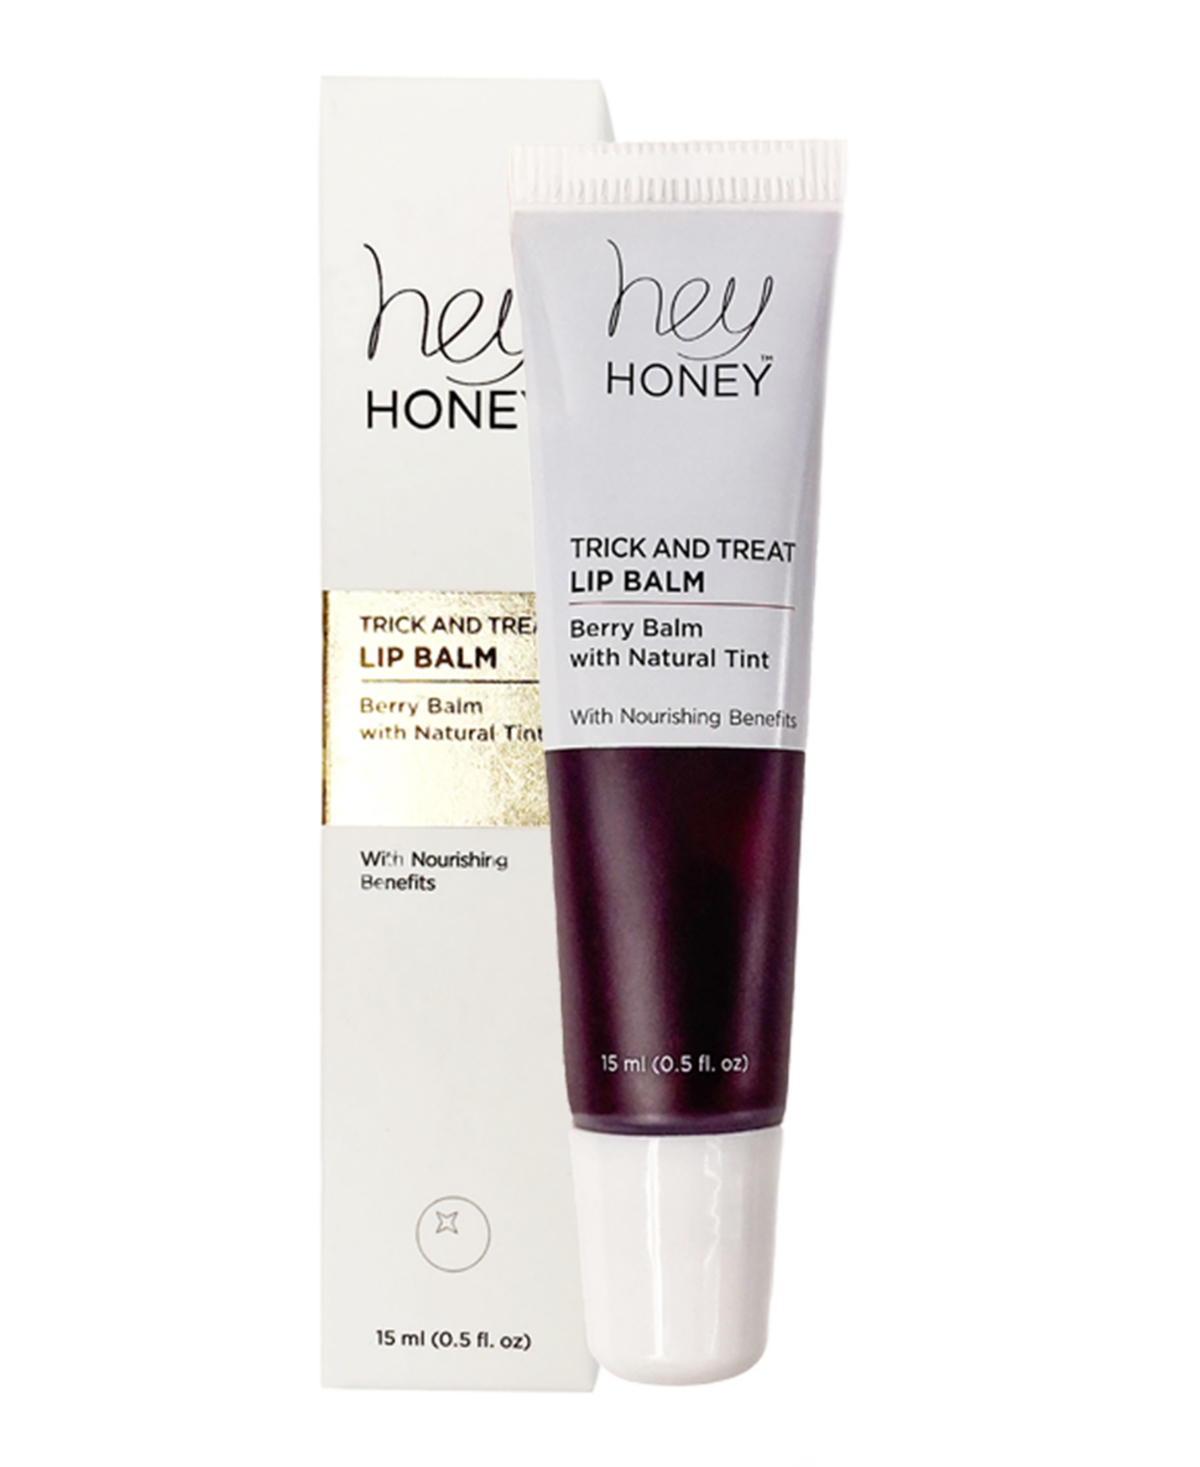 Hey Honey Trick And Treat Lip Balm Berry Balm With Natural Tint, 15 ml